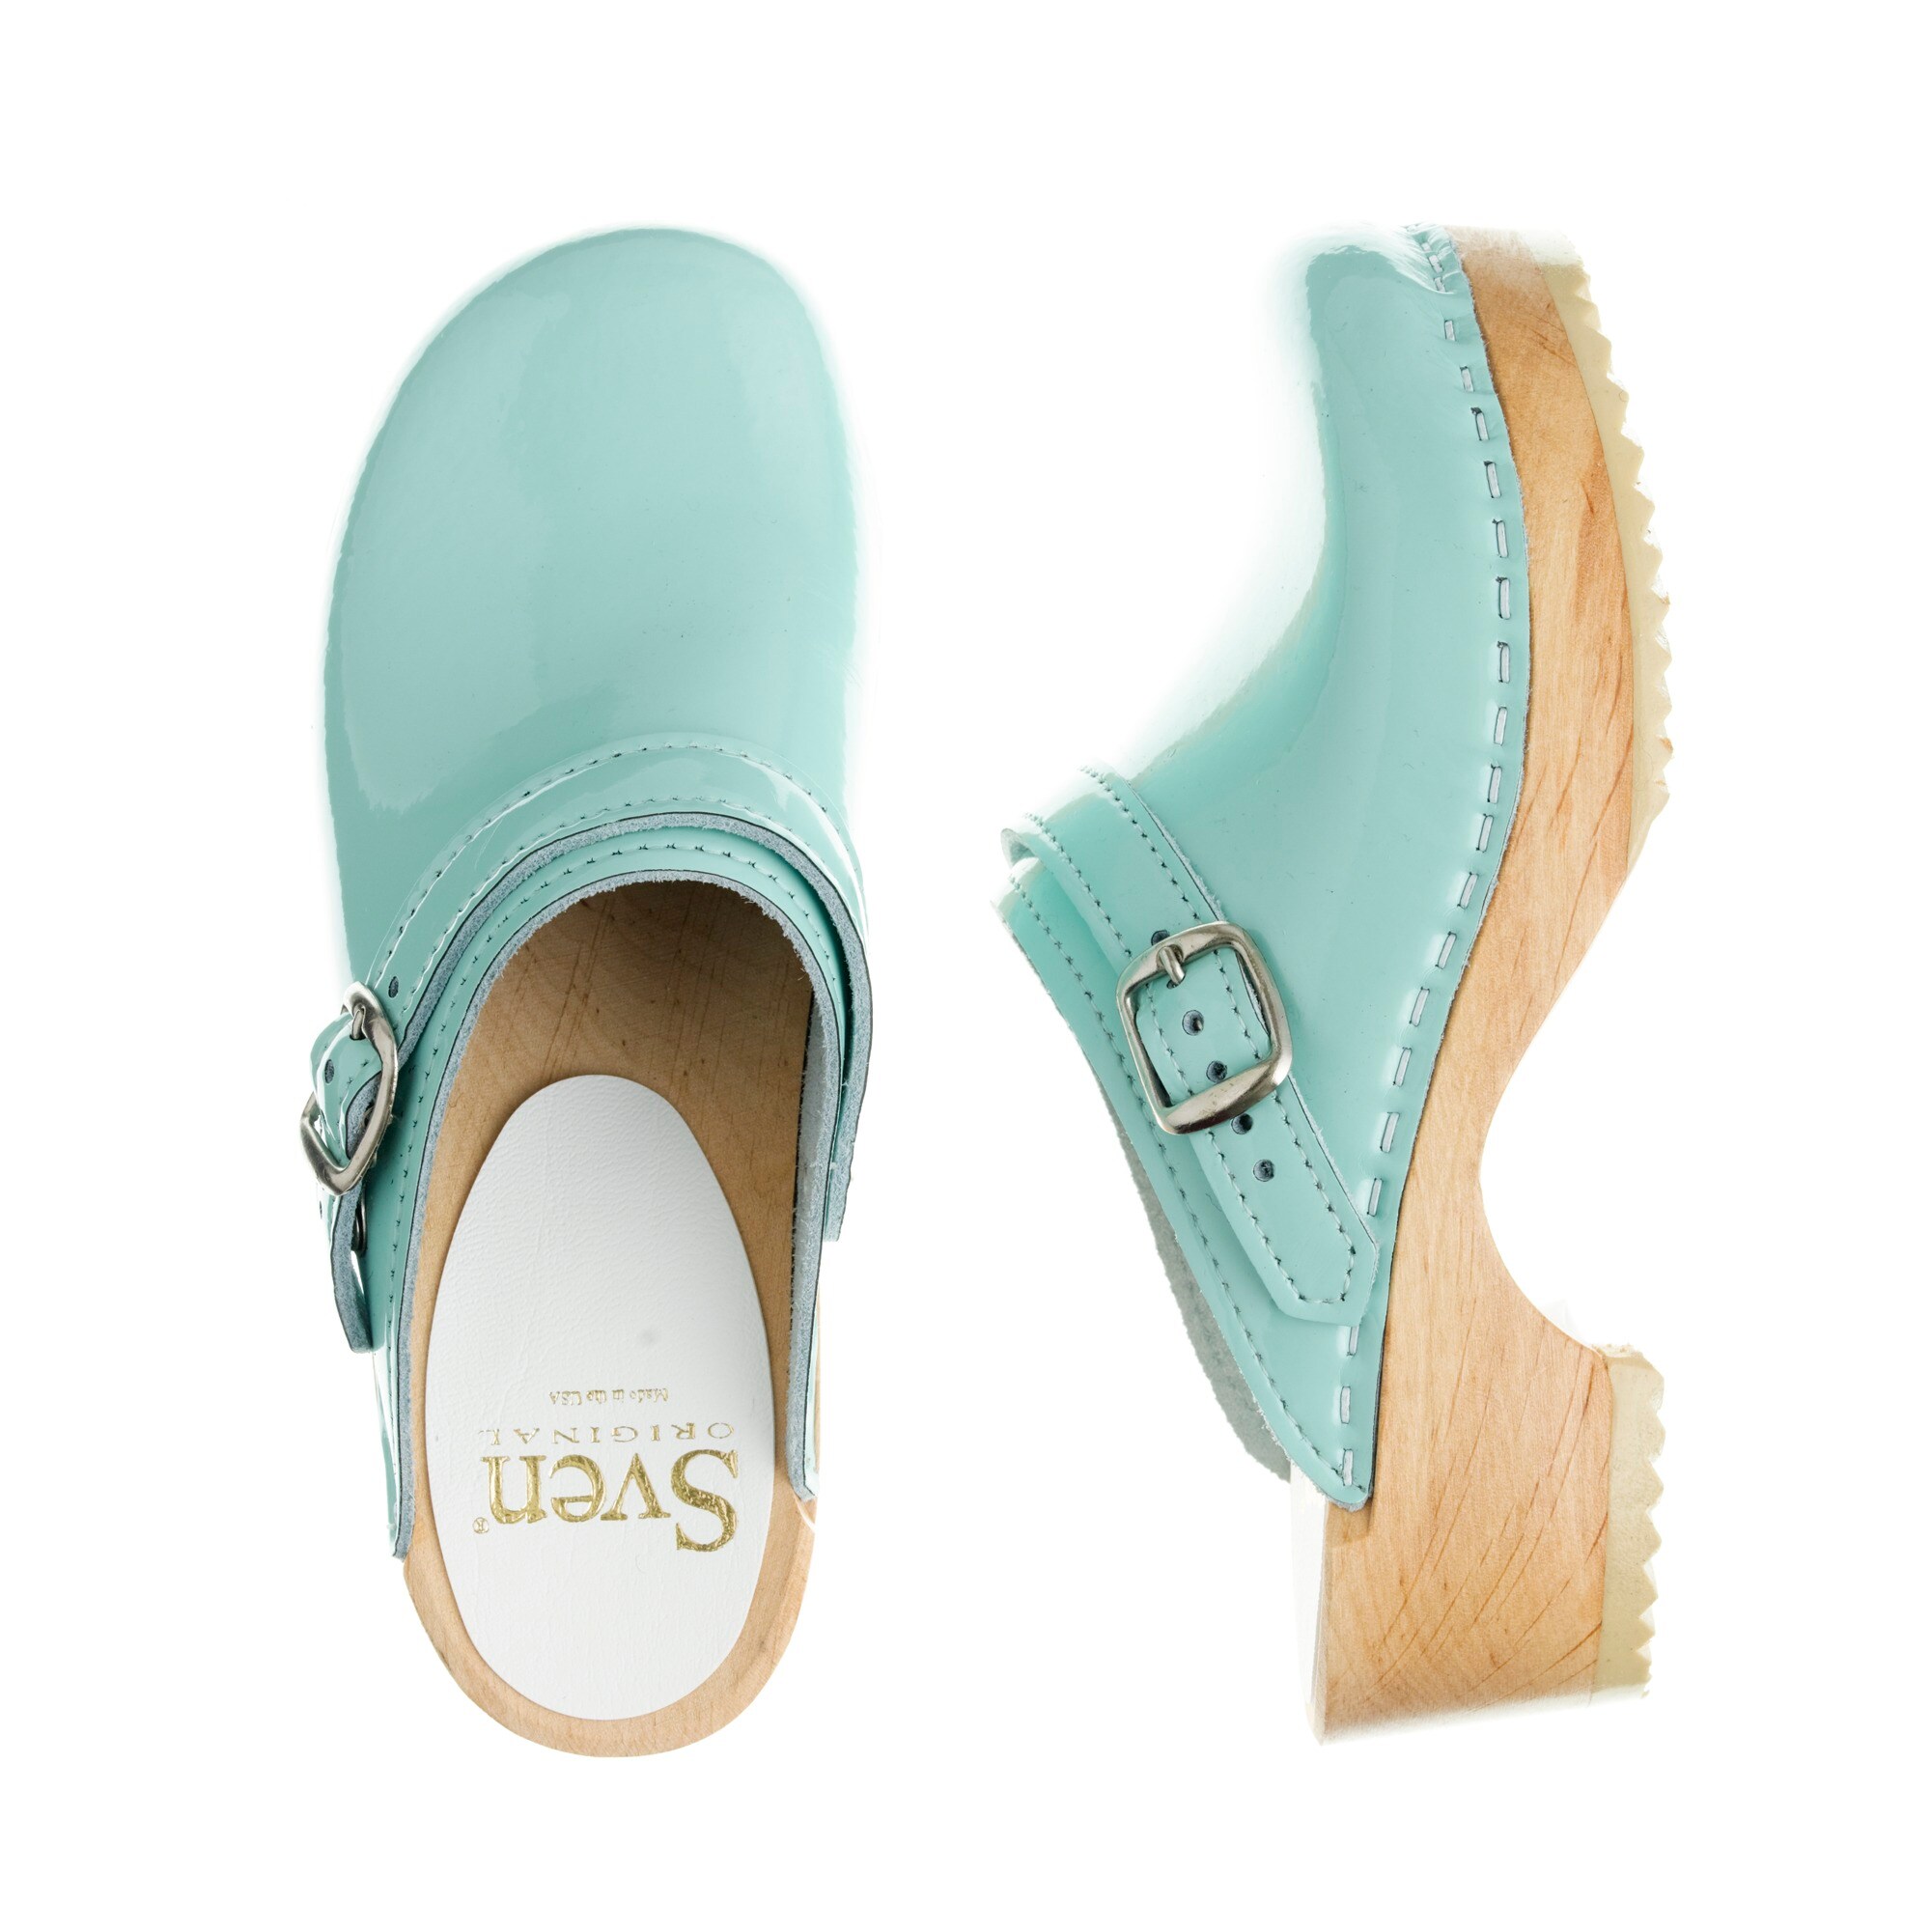 Girls' patent leather Sven® clogs : Girl ballet flats & loafers | J.Crew